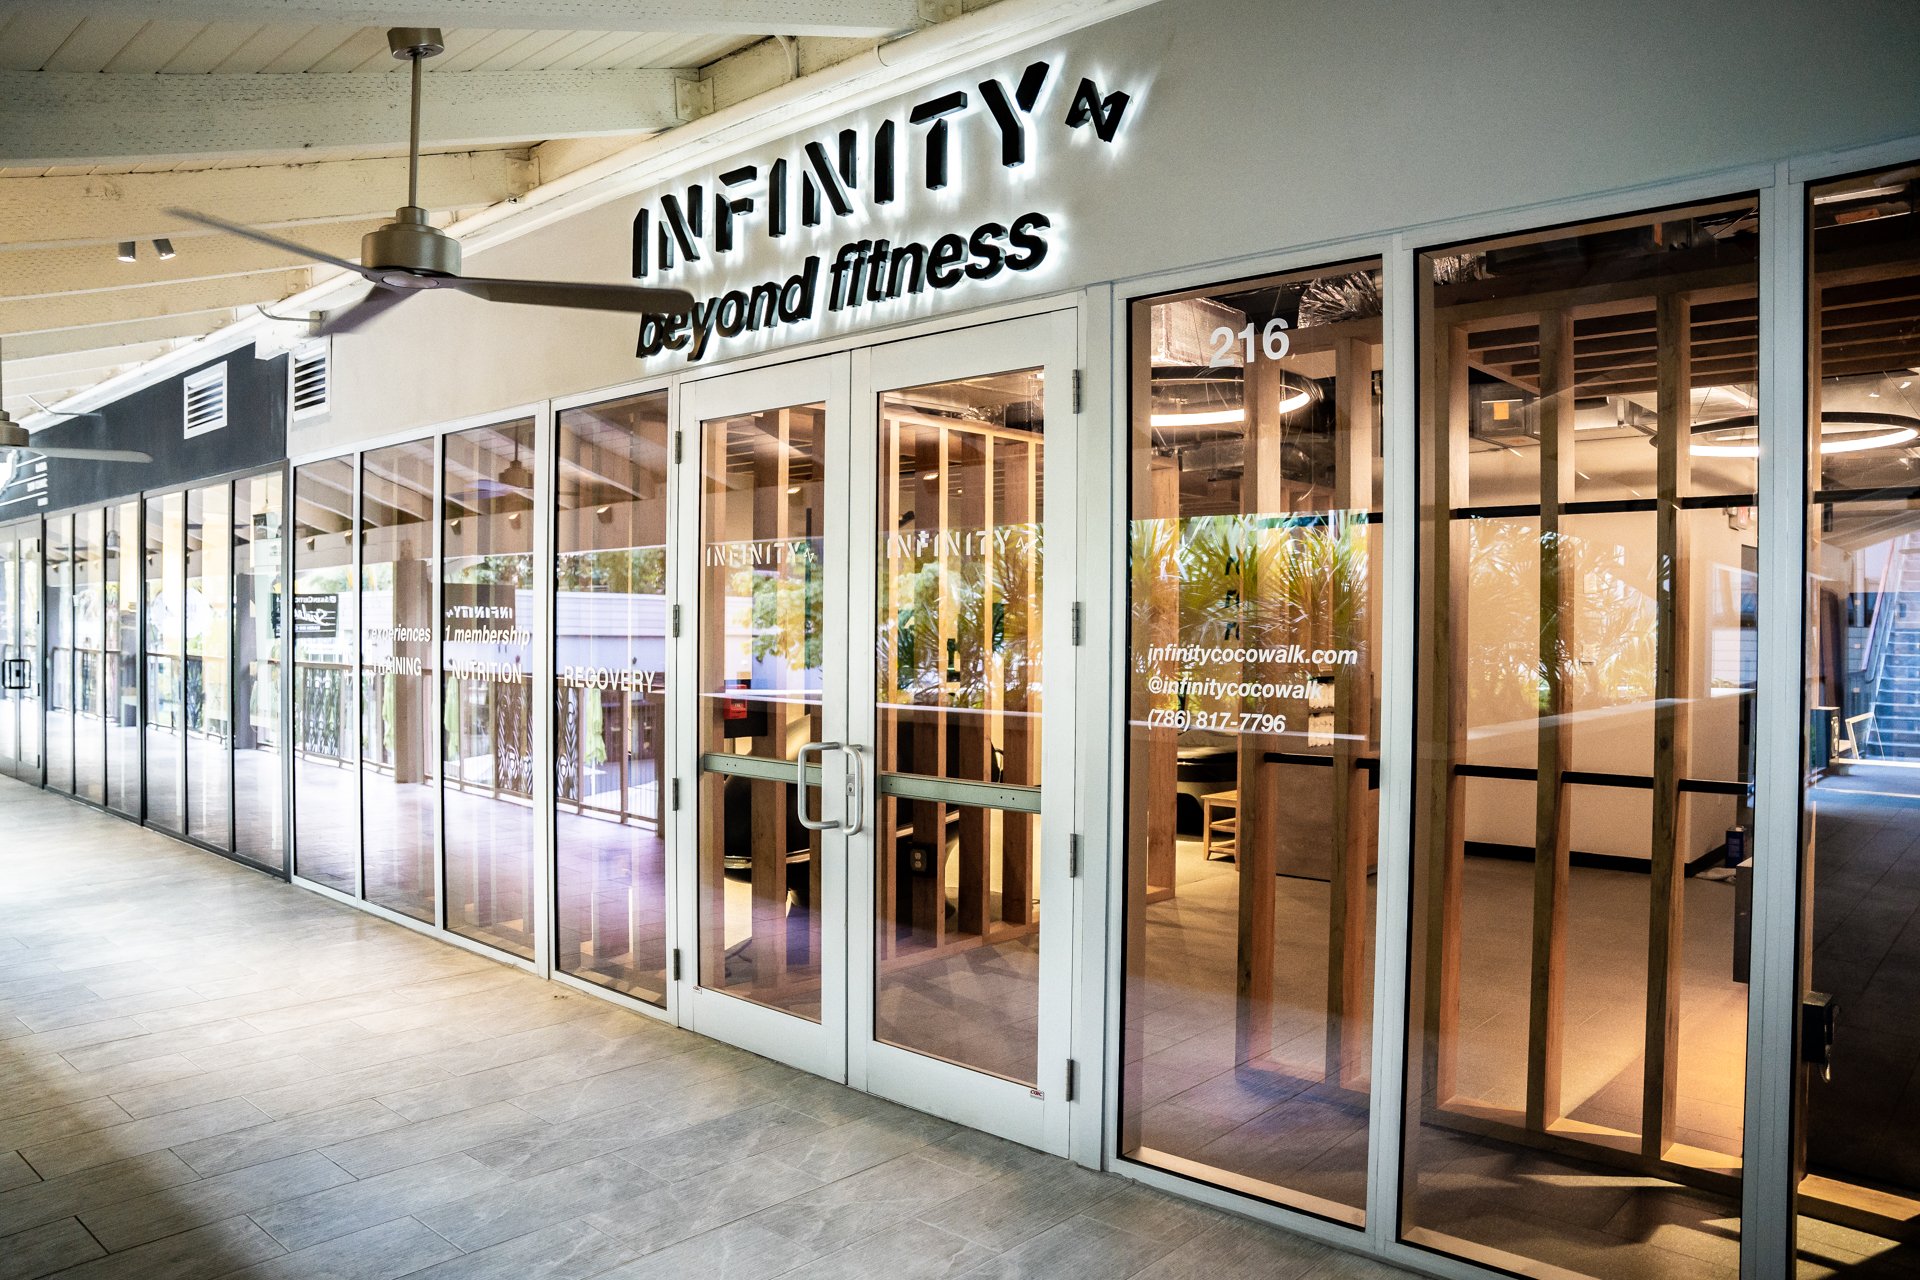 Gym Membership Levels | Month-to-Month, Long-Term Options | INFINITY, beyond fitness — INFINITY, beyond fitness